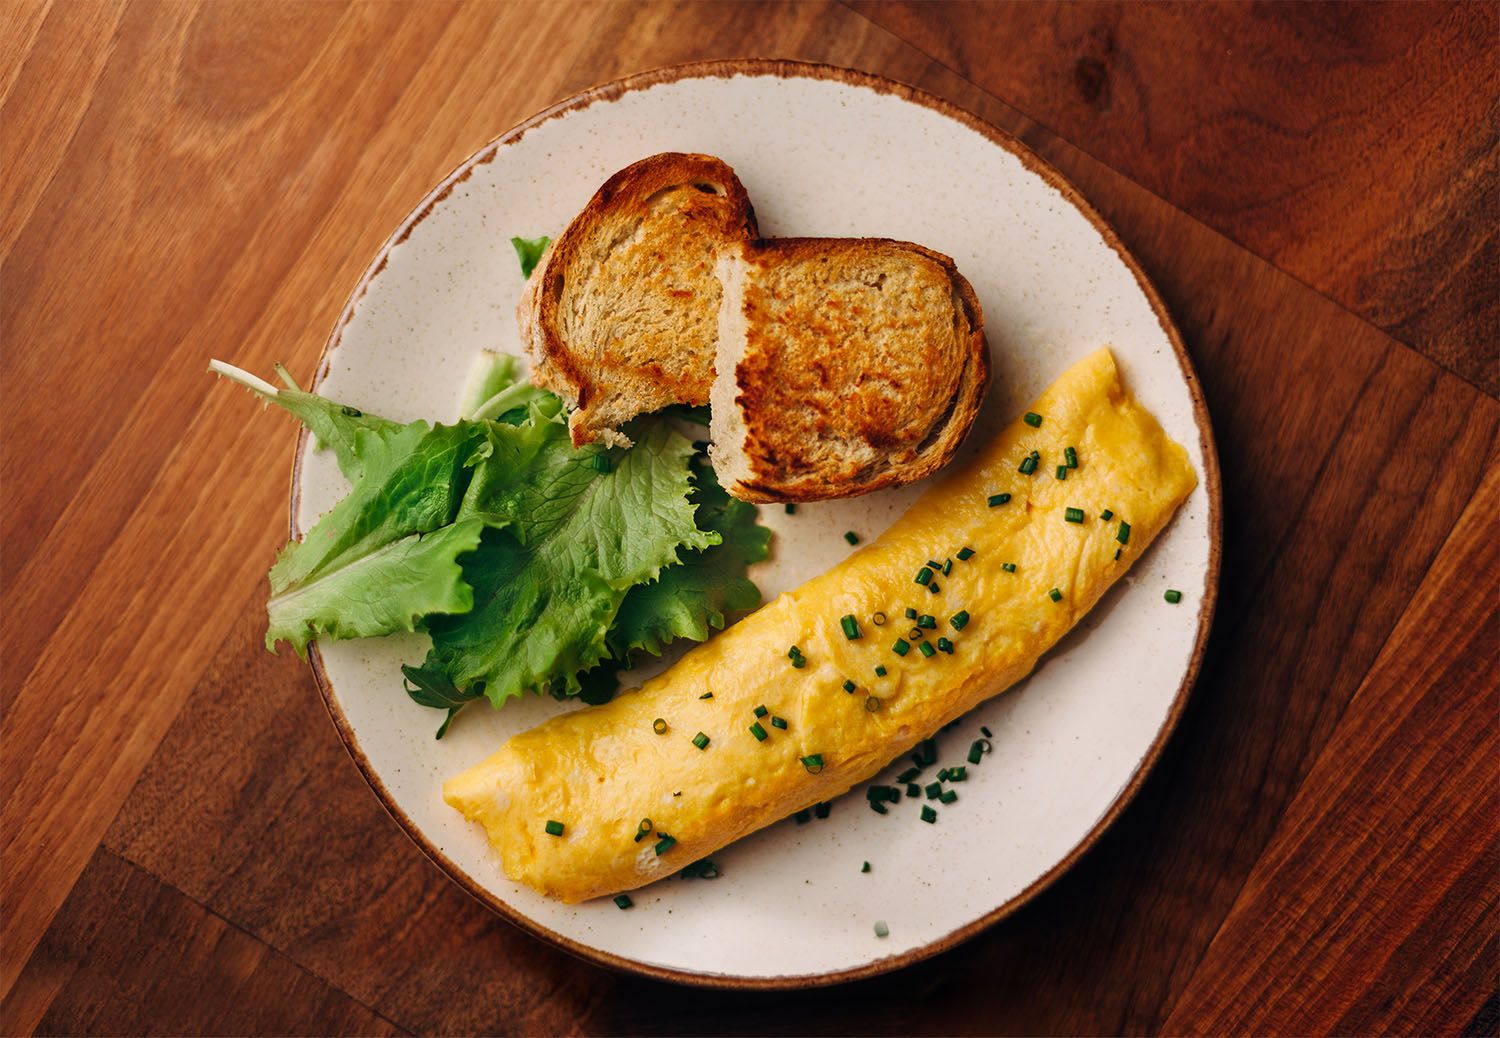 Chefs’ Tips for Making a Classic French Omelette